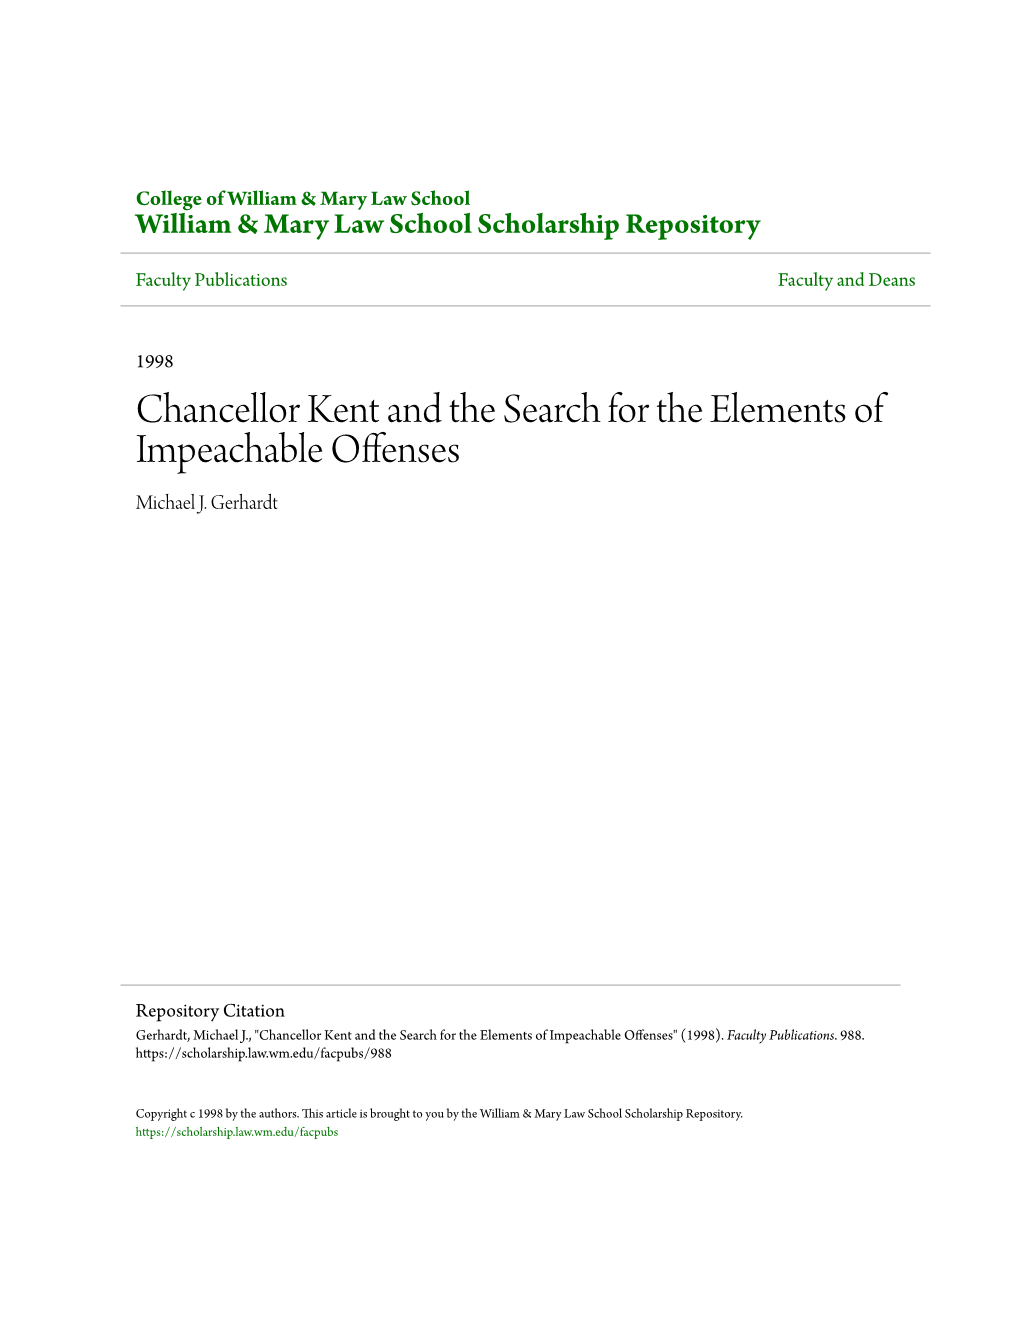 Chancellor Kent and the Search for the Elements of Impeachable Offenses Michael J